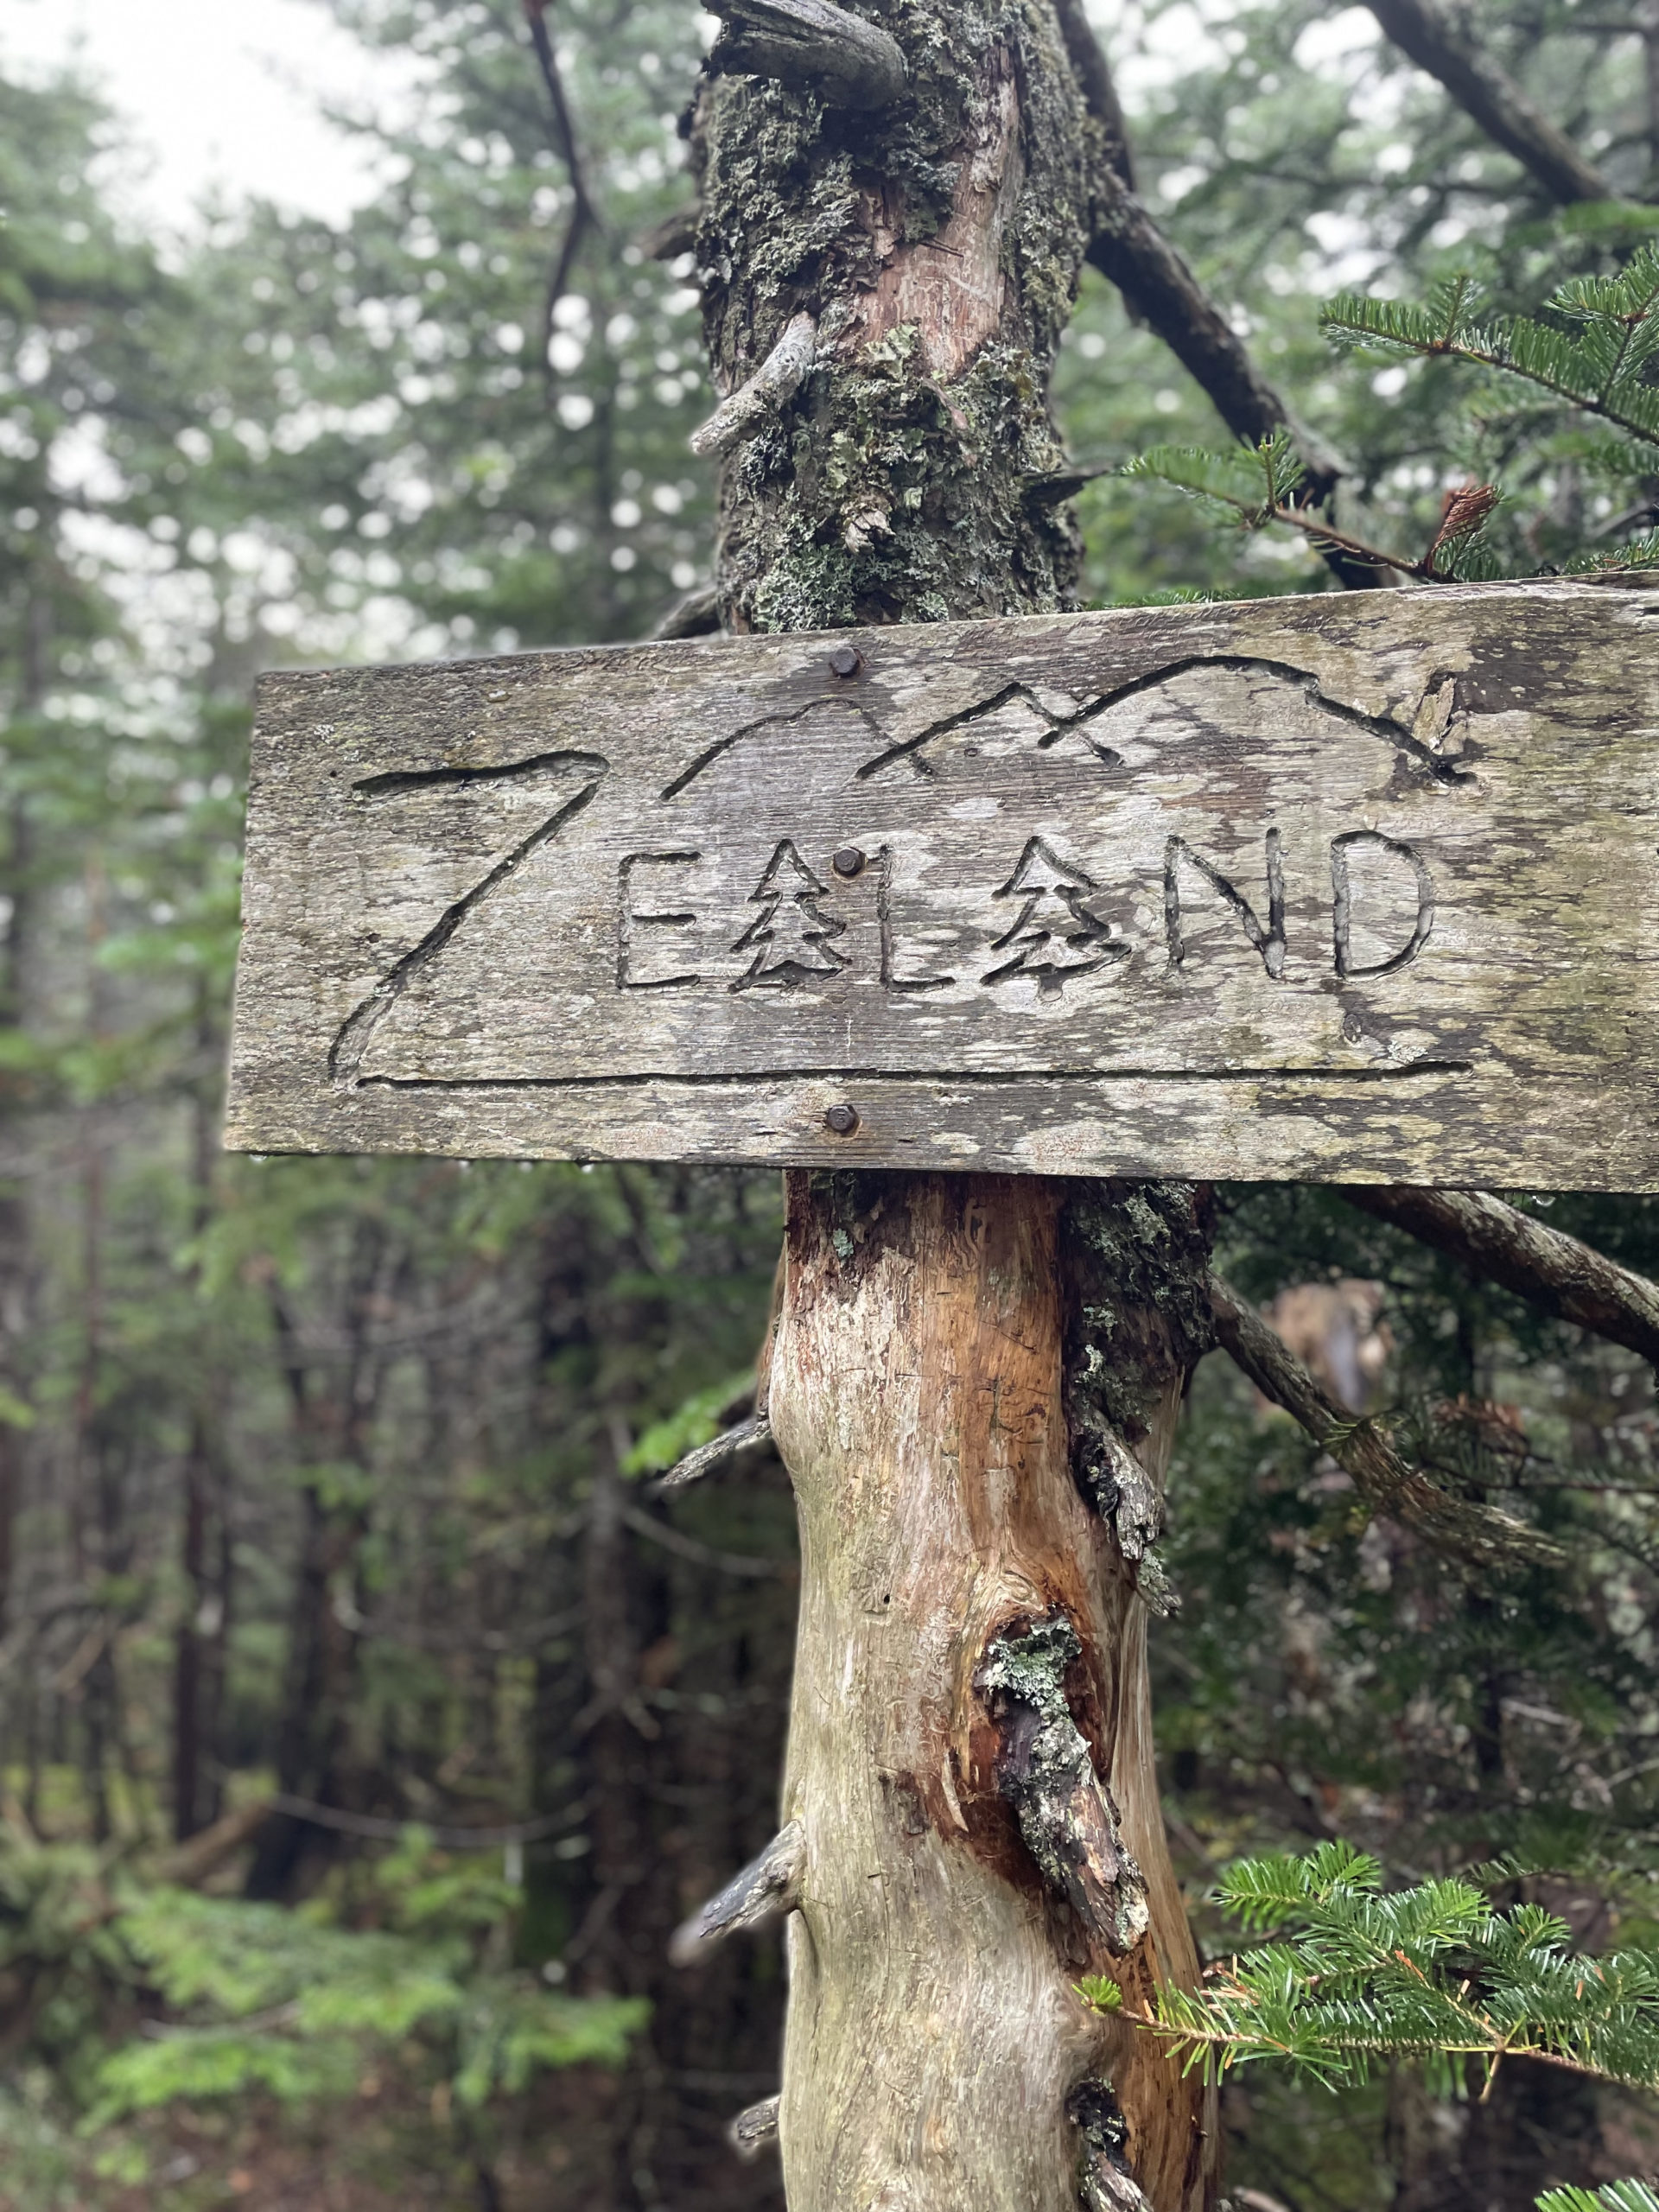 Zealand summit sign, seen while hiking Mt. Hale and Mt. Zealand in the White Mountain National Forest, New Hampshire